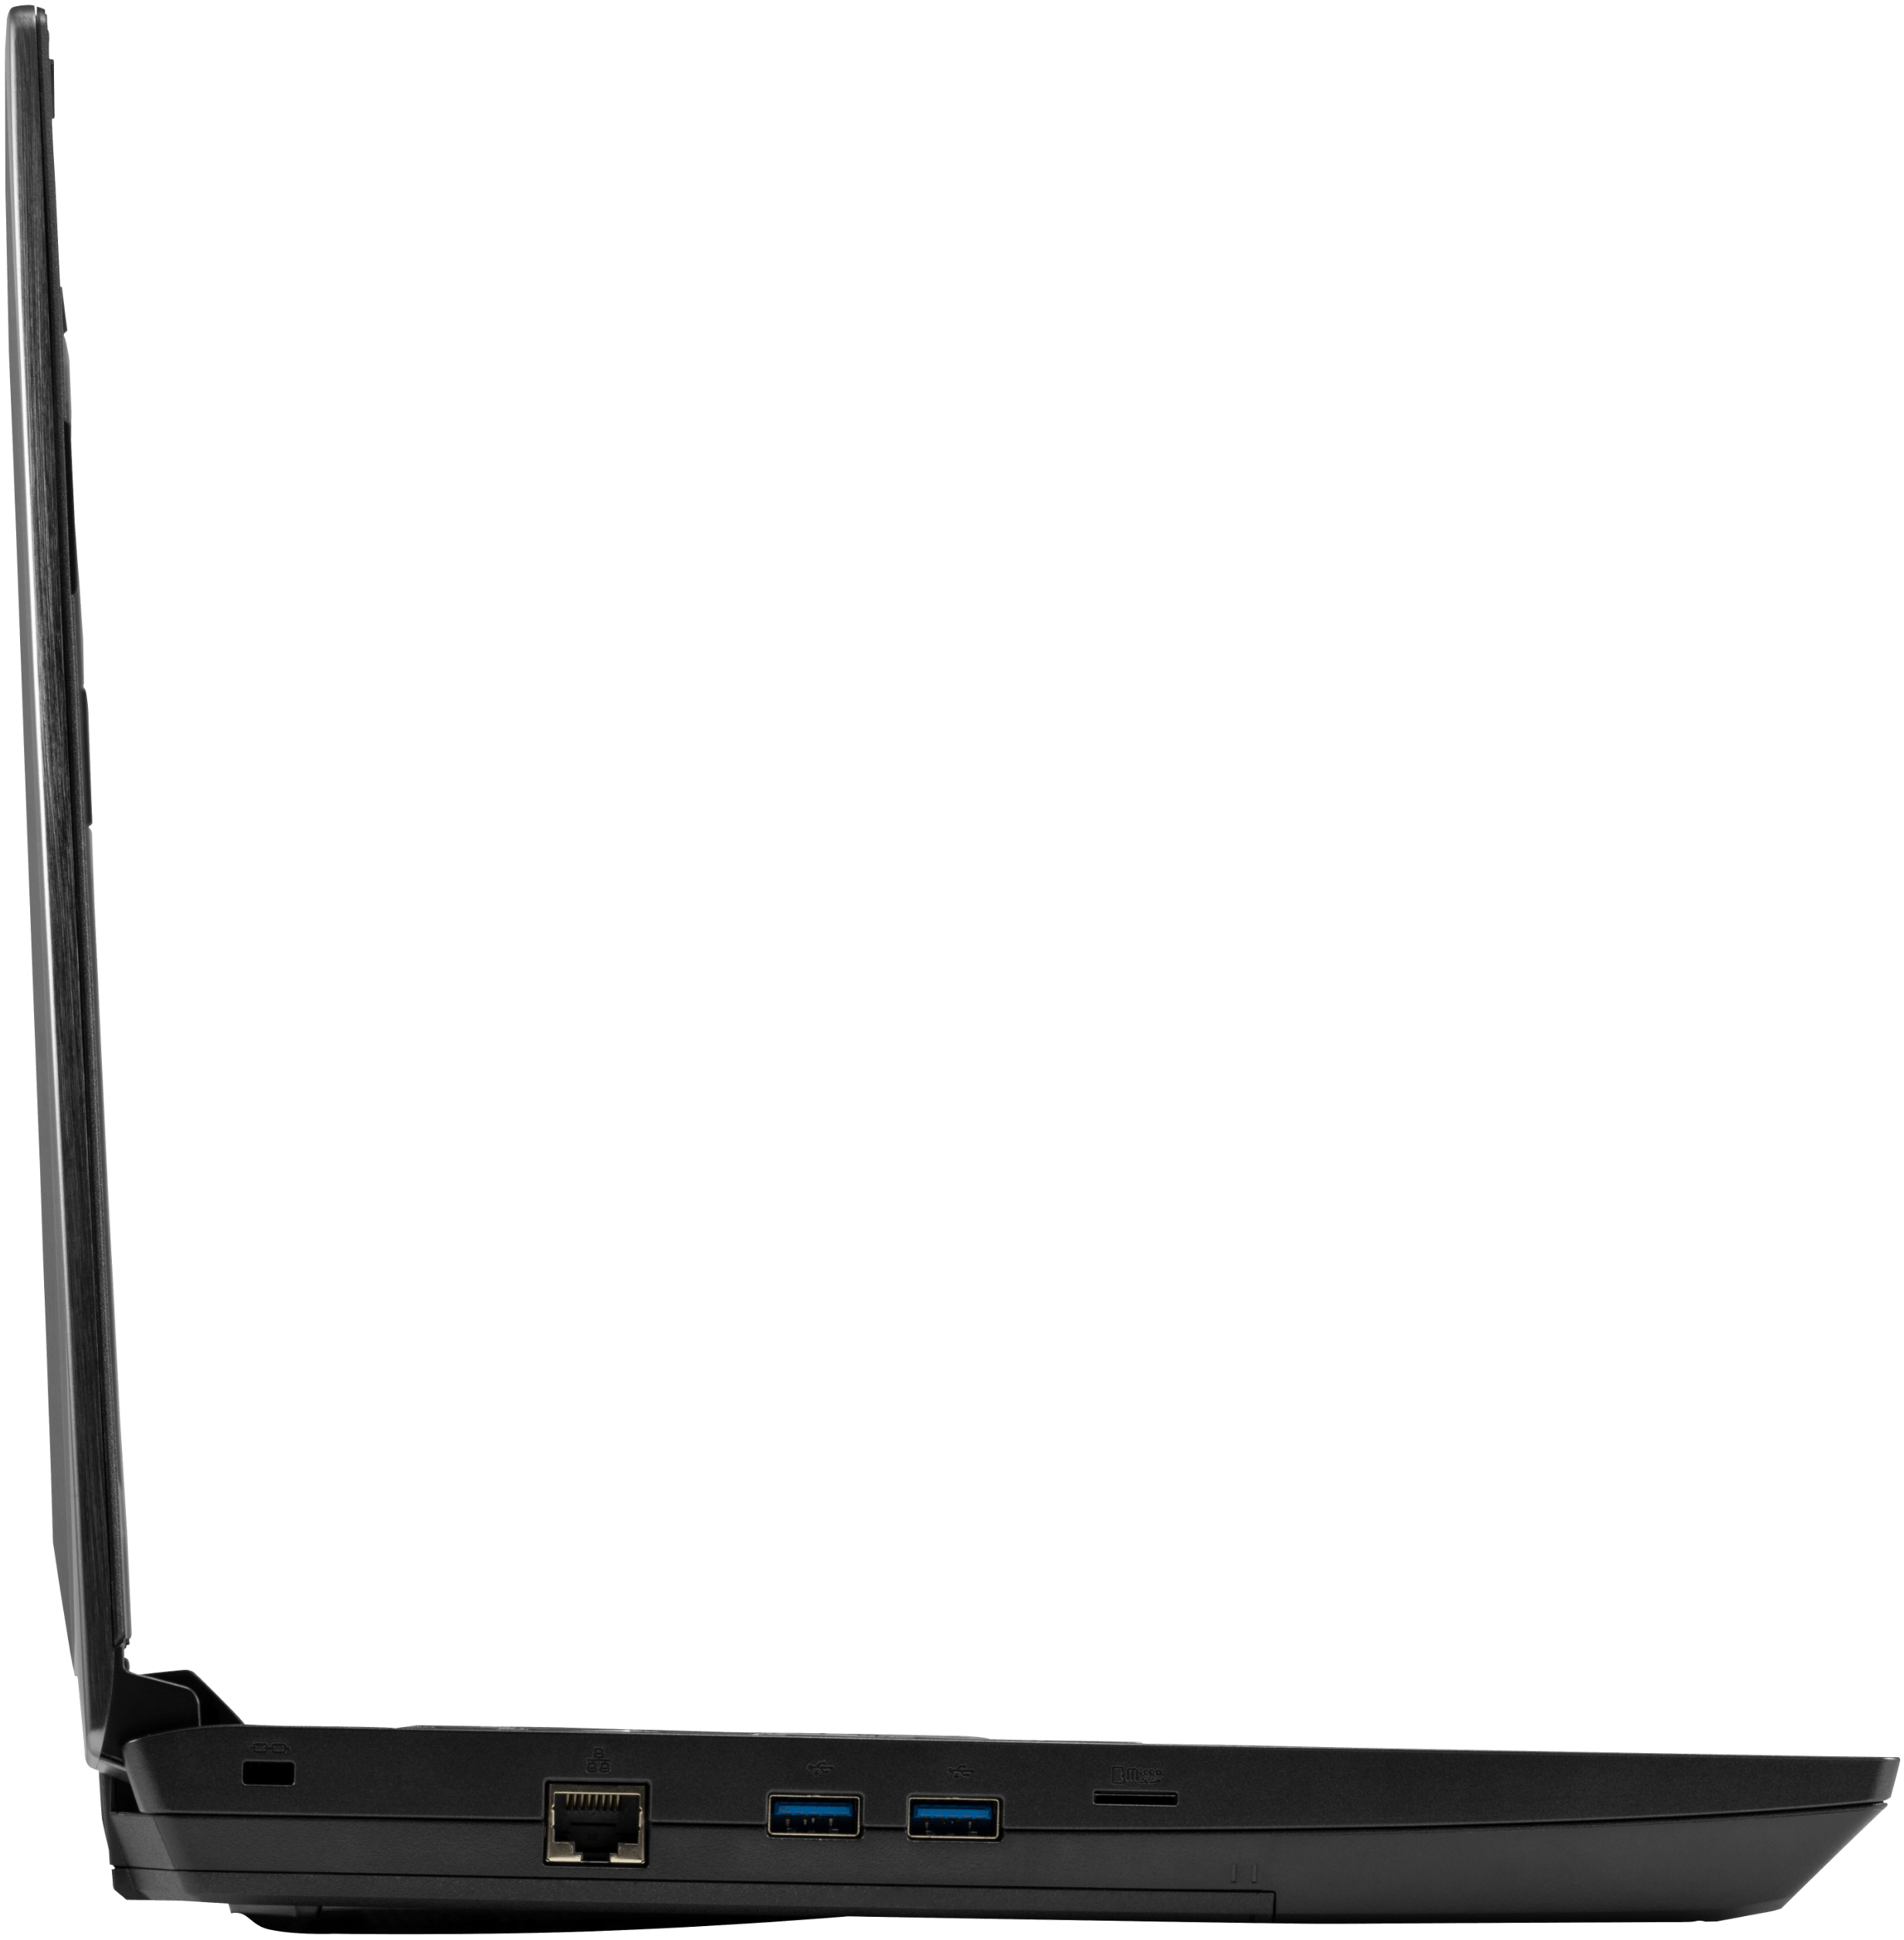 A left profile view of the Serval laptop’s ports, namely Kensington Lock, Ethernet, USB, and microSD.